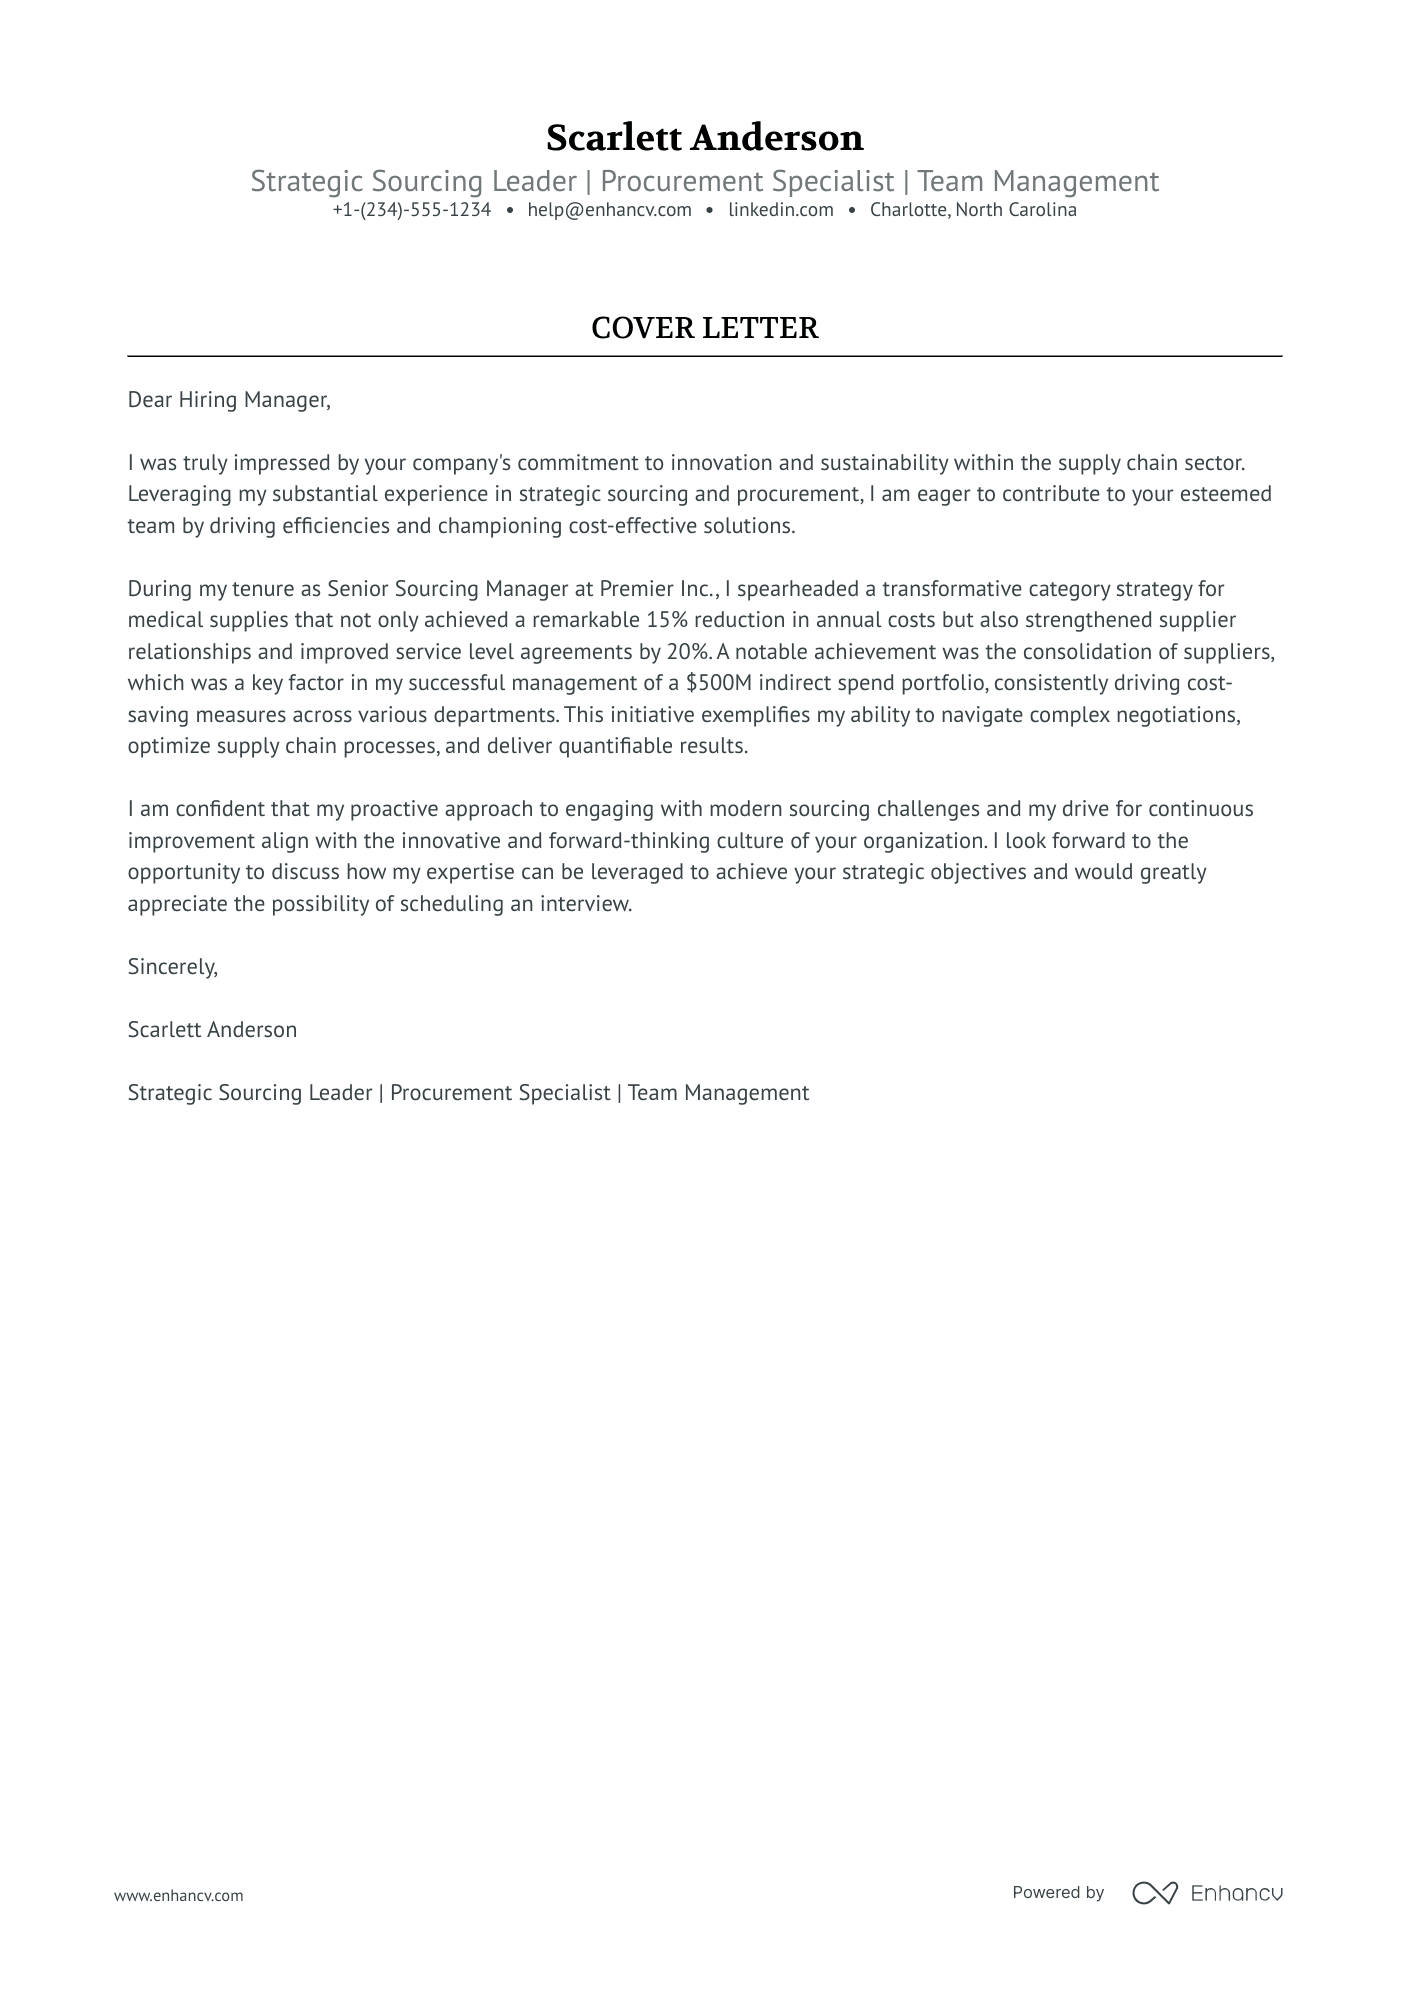 Team Manager cover letter